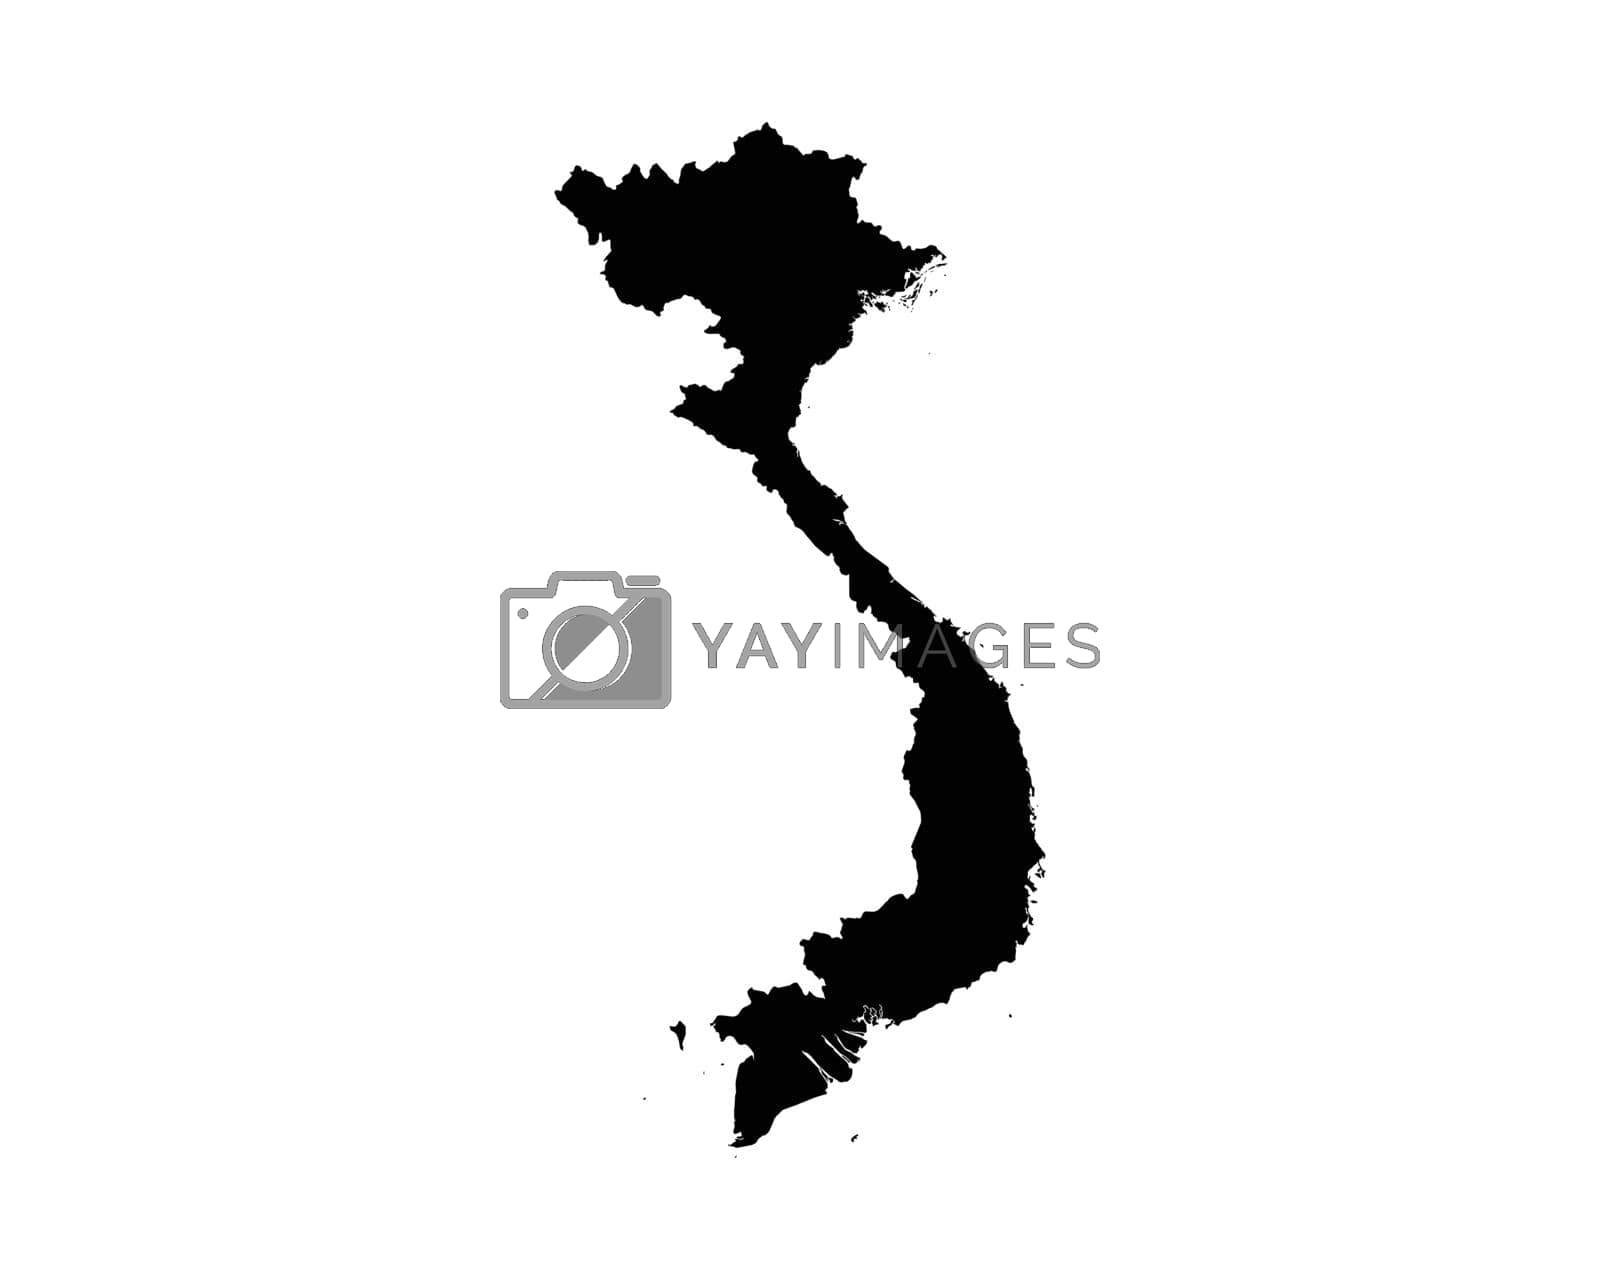 Royalty free image of Vietnam Map by xileodesigns